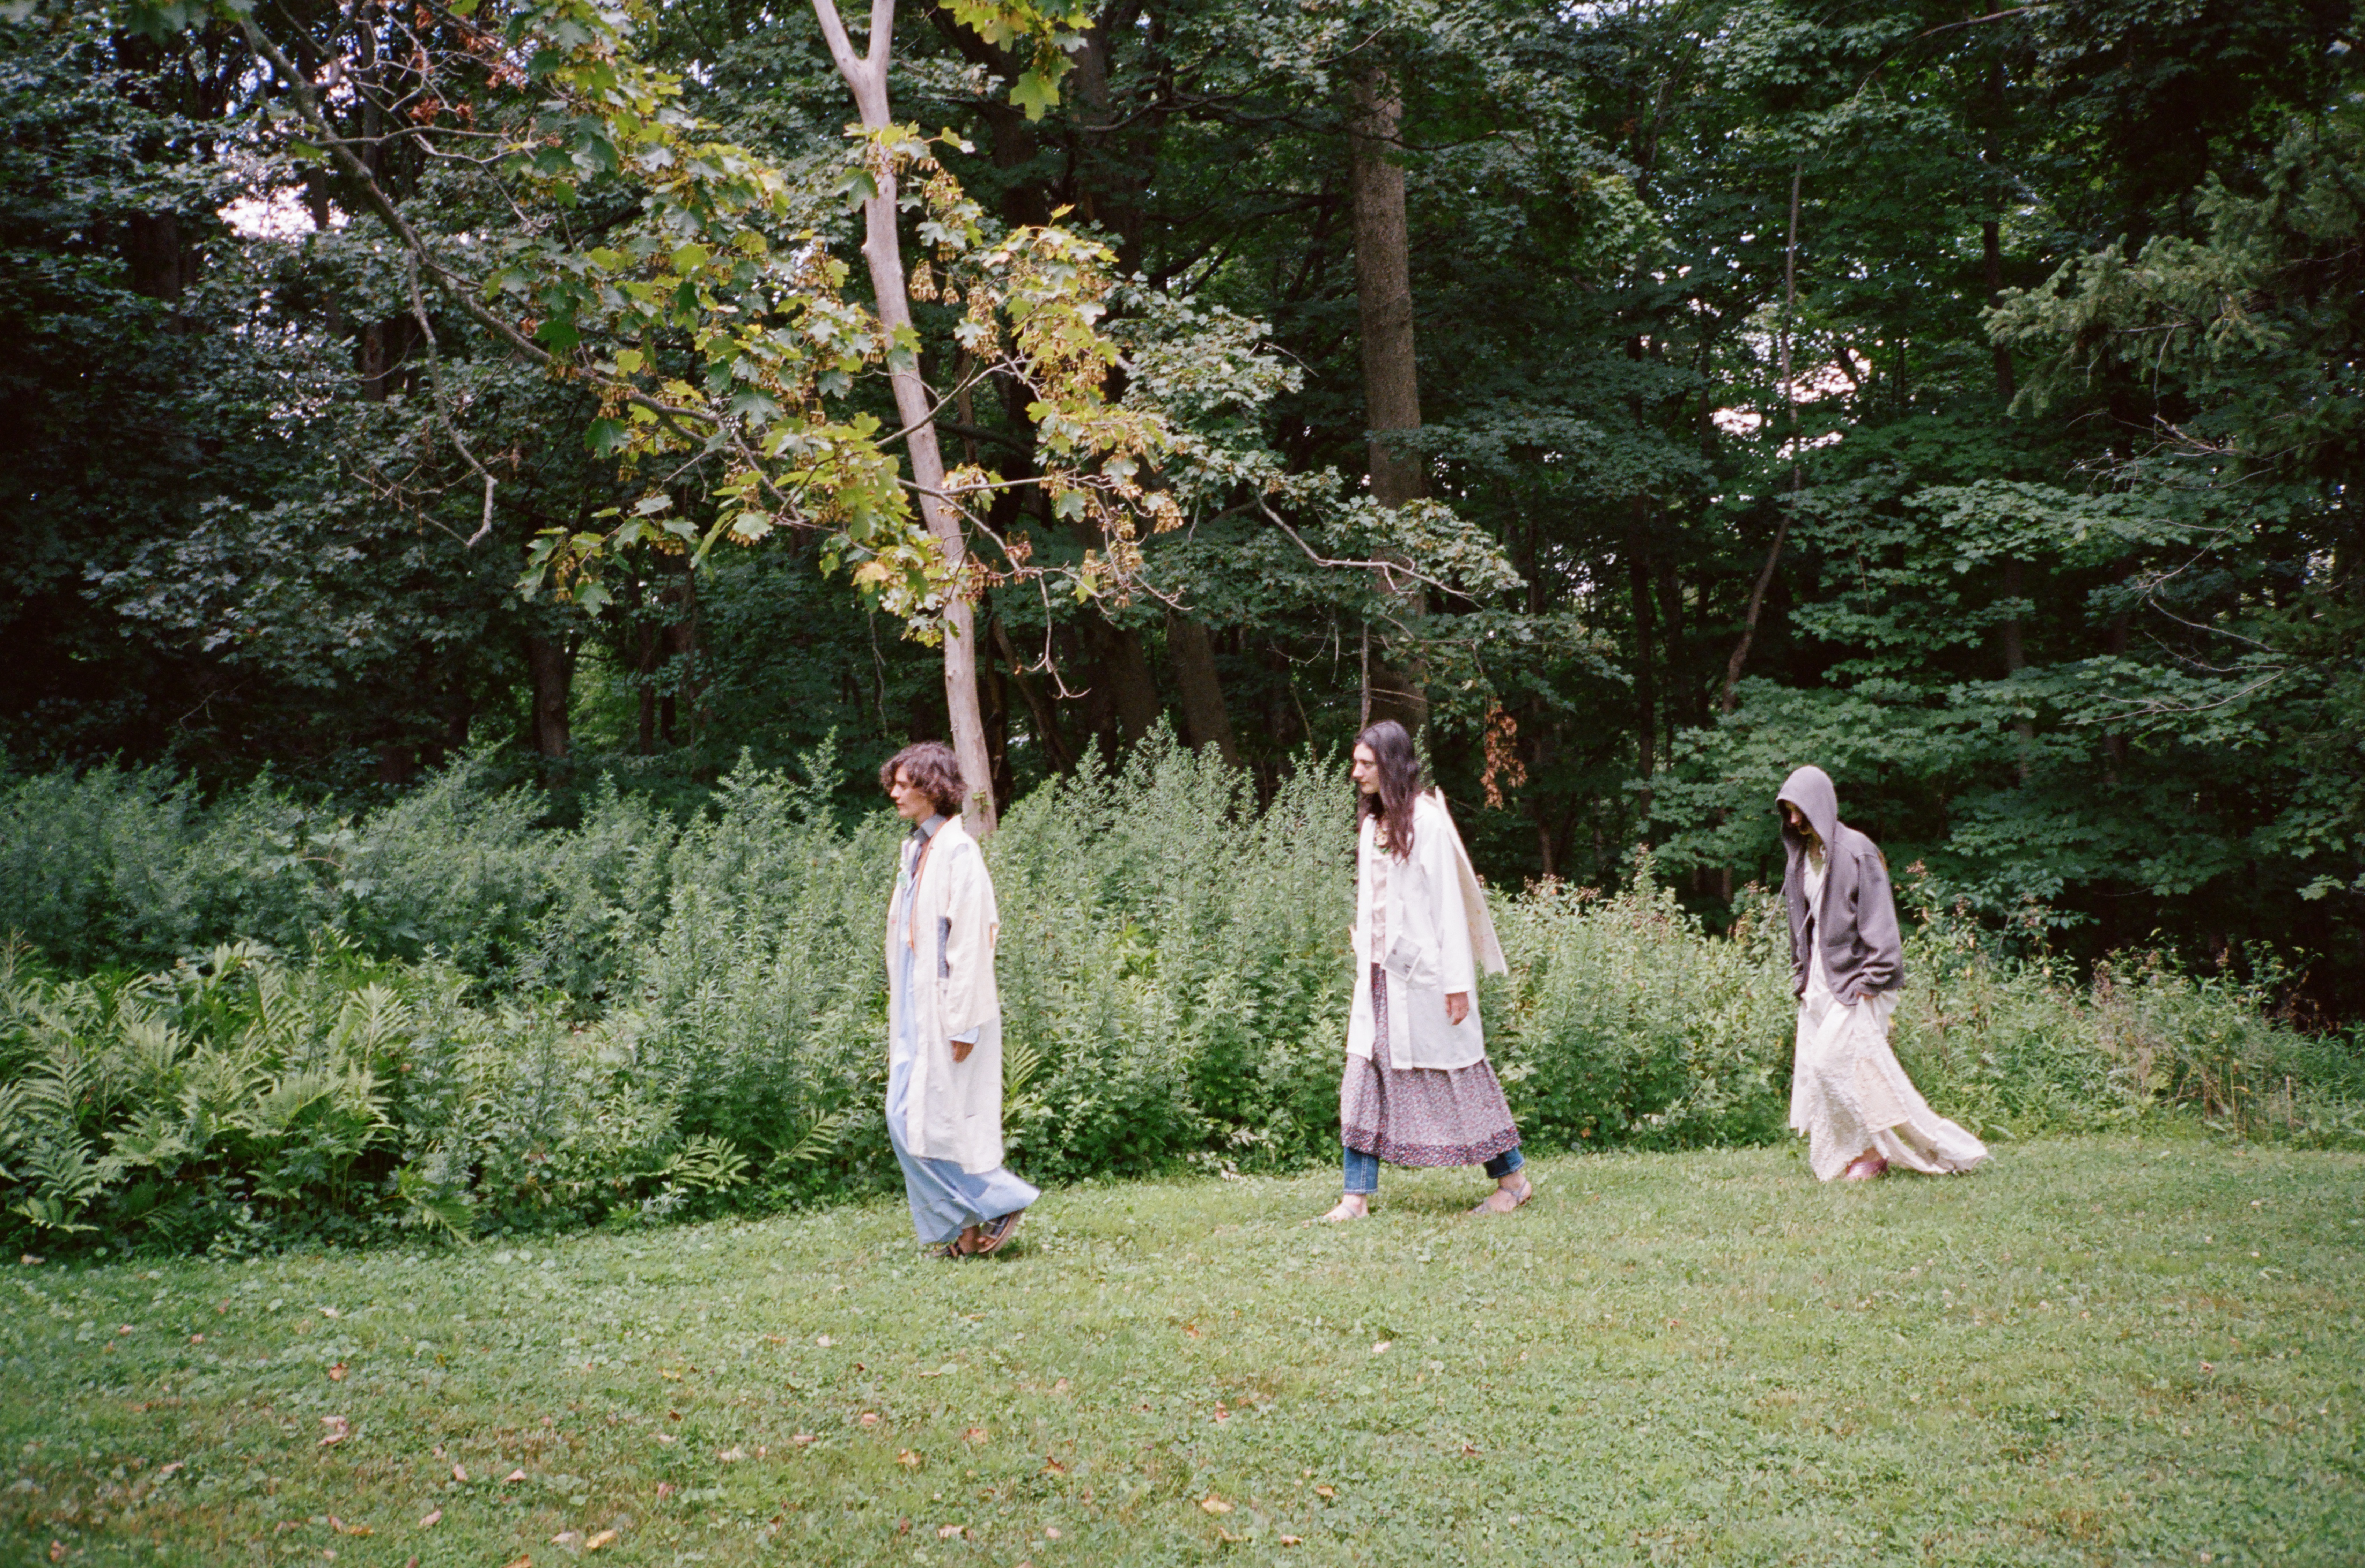 Monique Mouton, Kat Herriman and Bunny Lampert take a walk. Clothing and styling by Susan Cianciolo. 